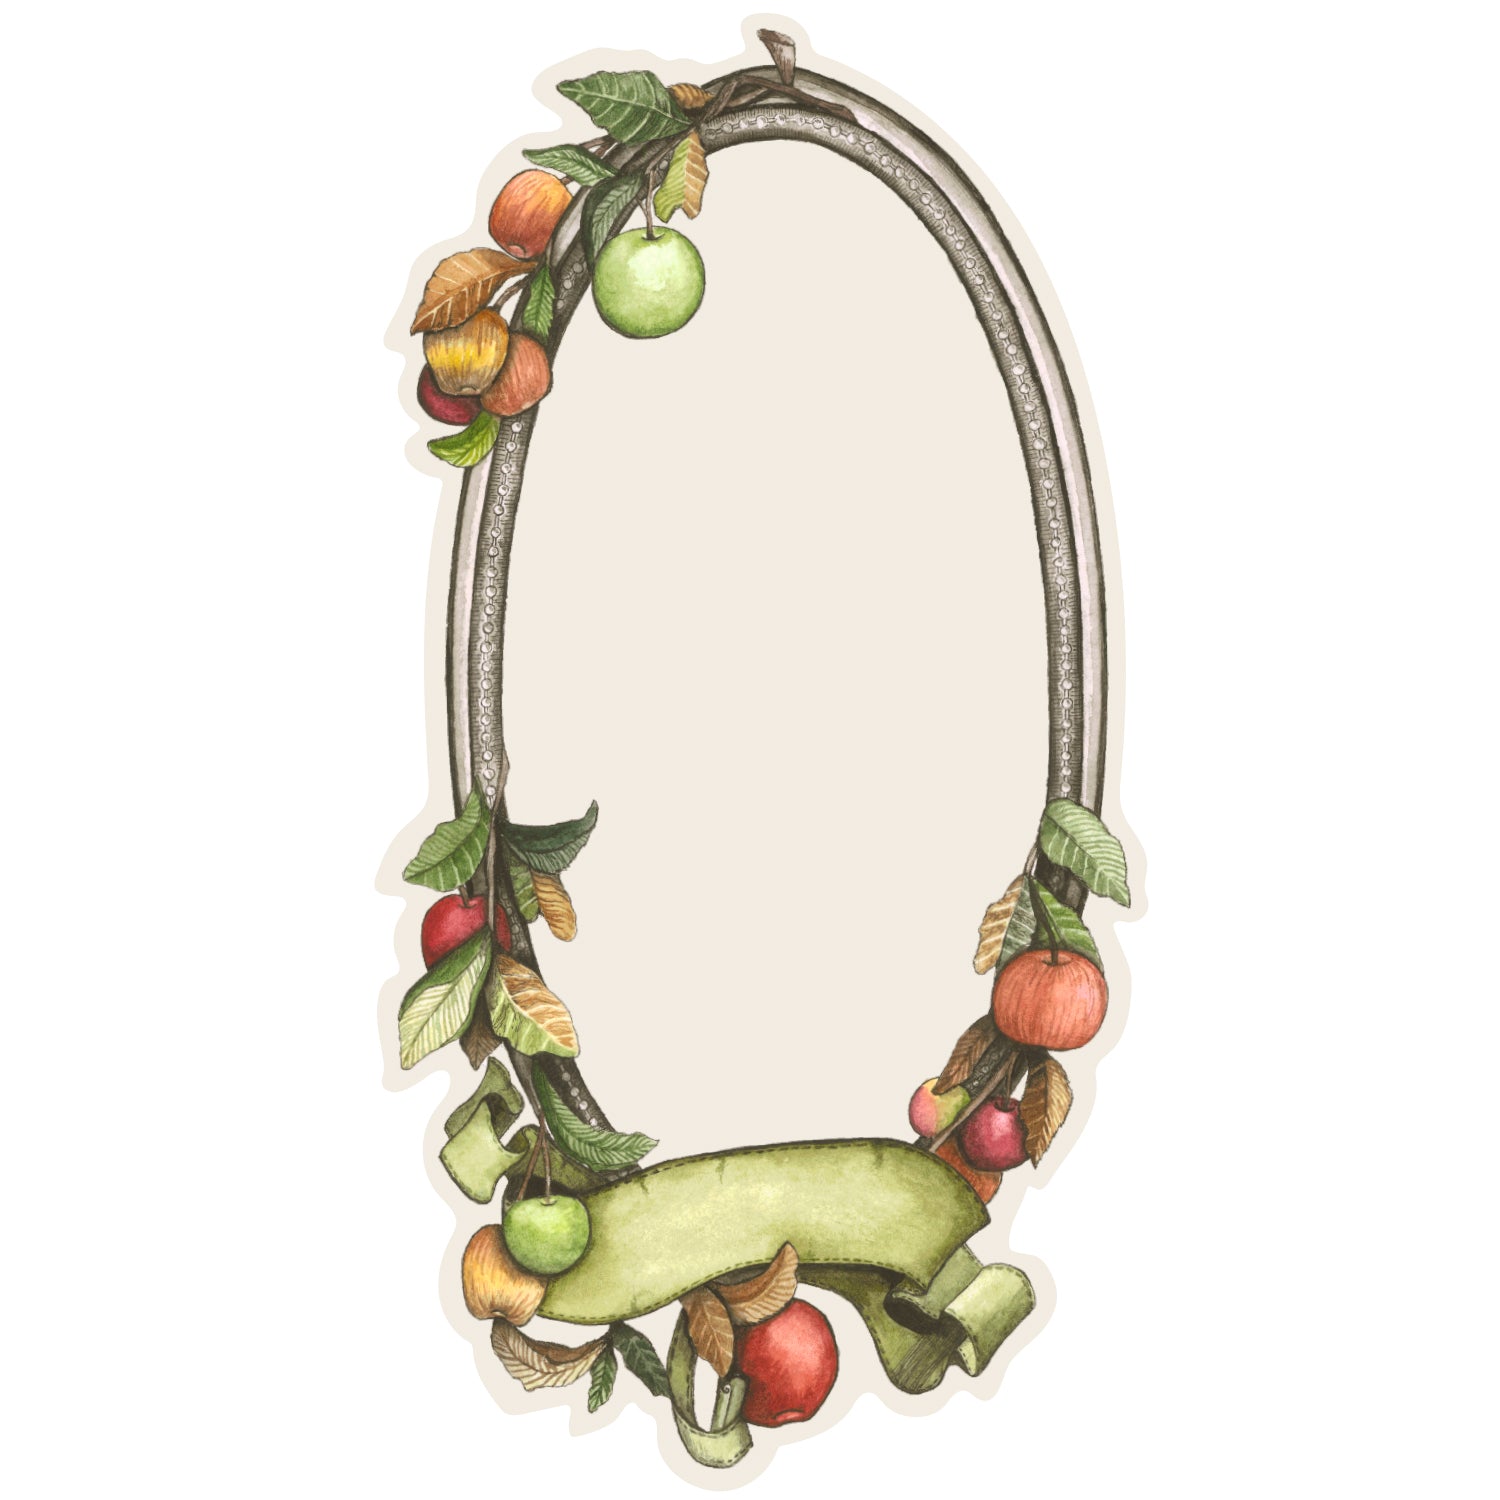 A white, die-cut oval card framed with a simple gray frame adorned with red, green and orange apples with green leaves, and a blank green ribbon unfurling along the bottom of the card. The blank white oval center and the green ribbon both provide ample space for personalization.